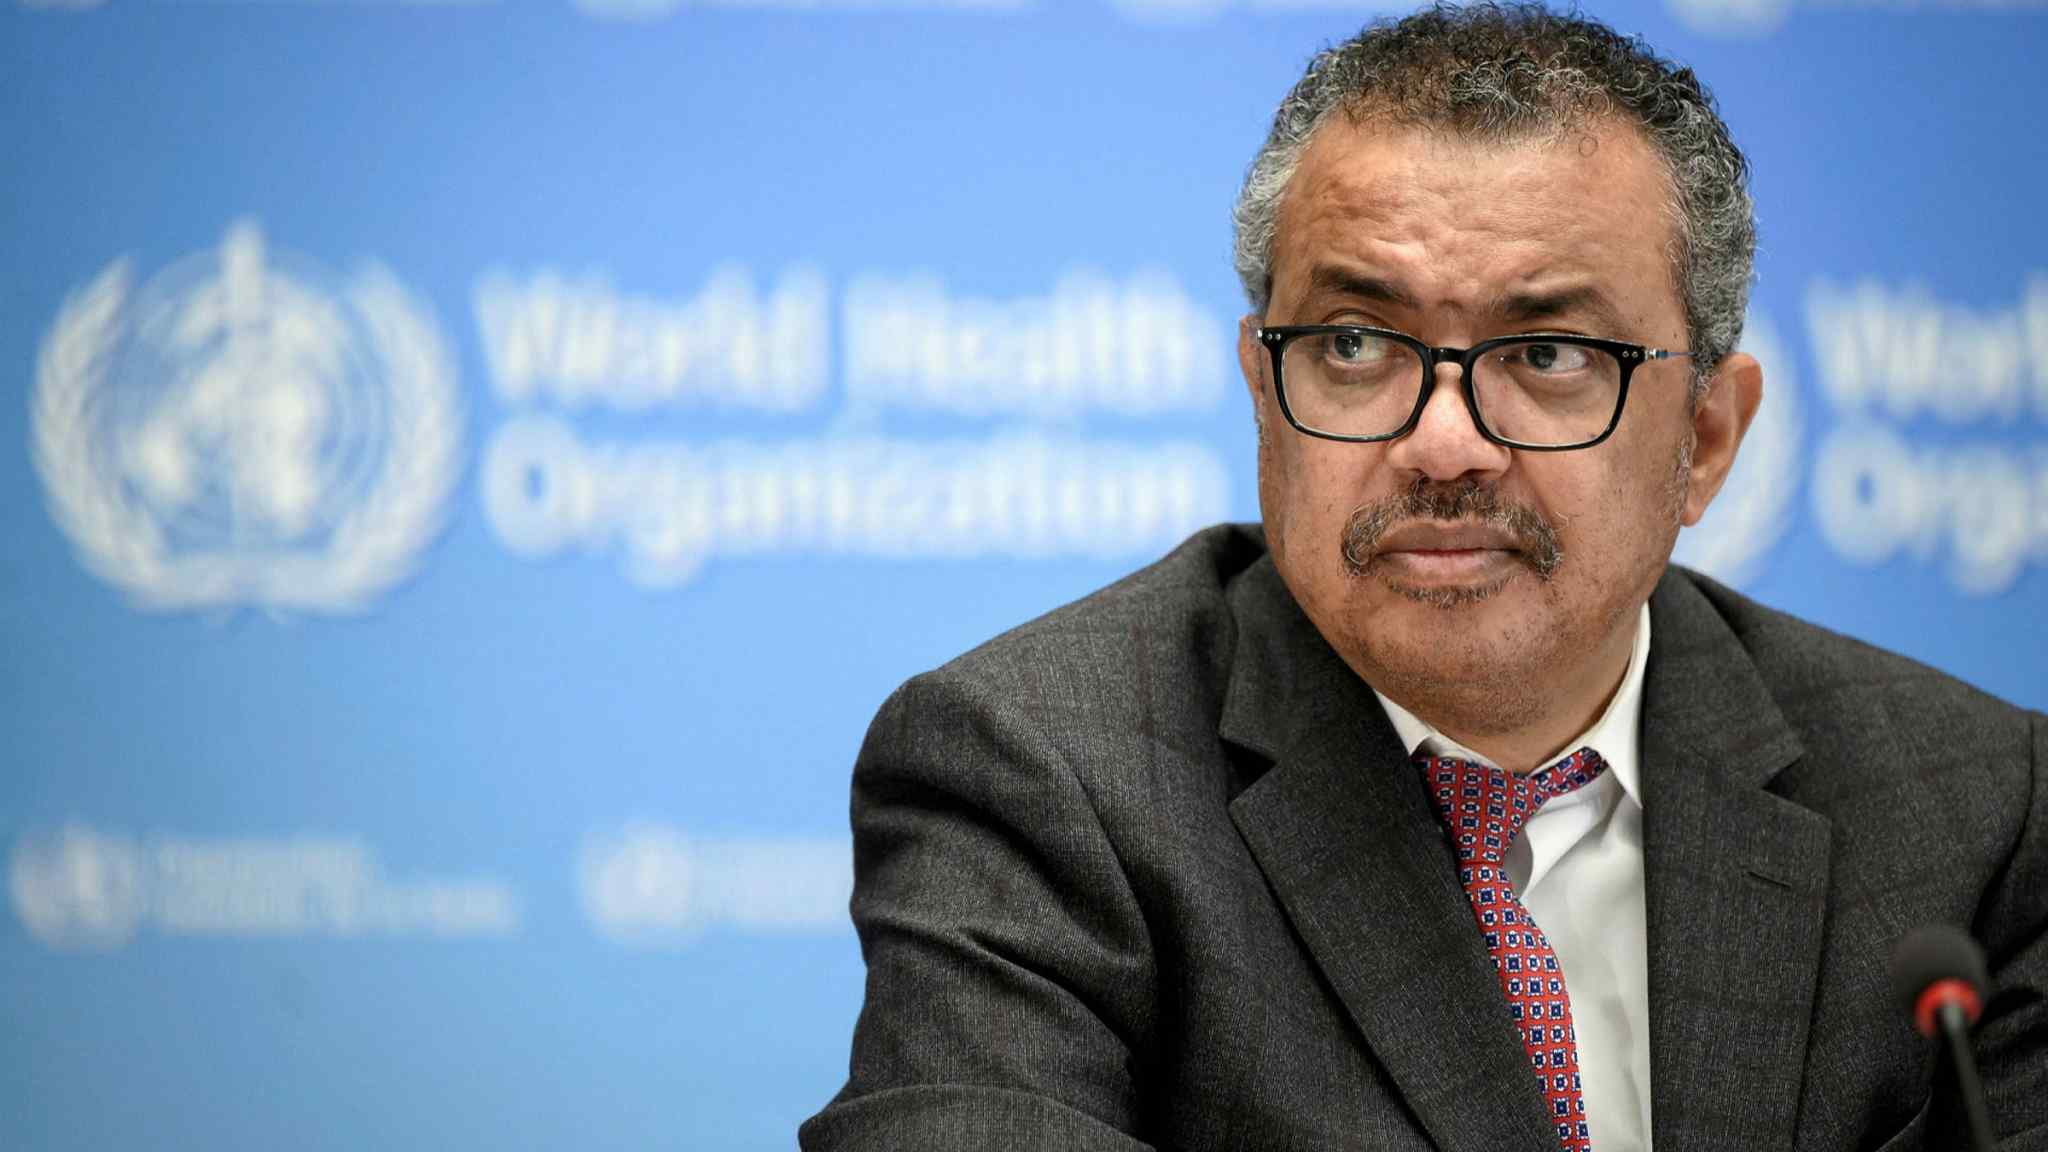 Tedros re-elected as director-general of World Health Organization 